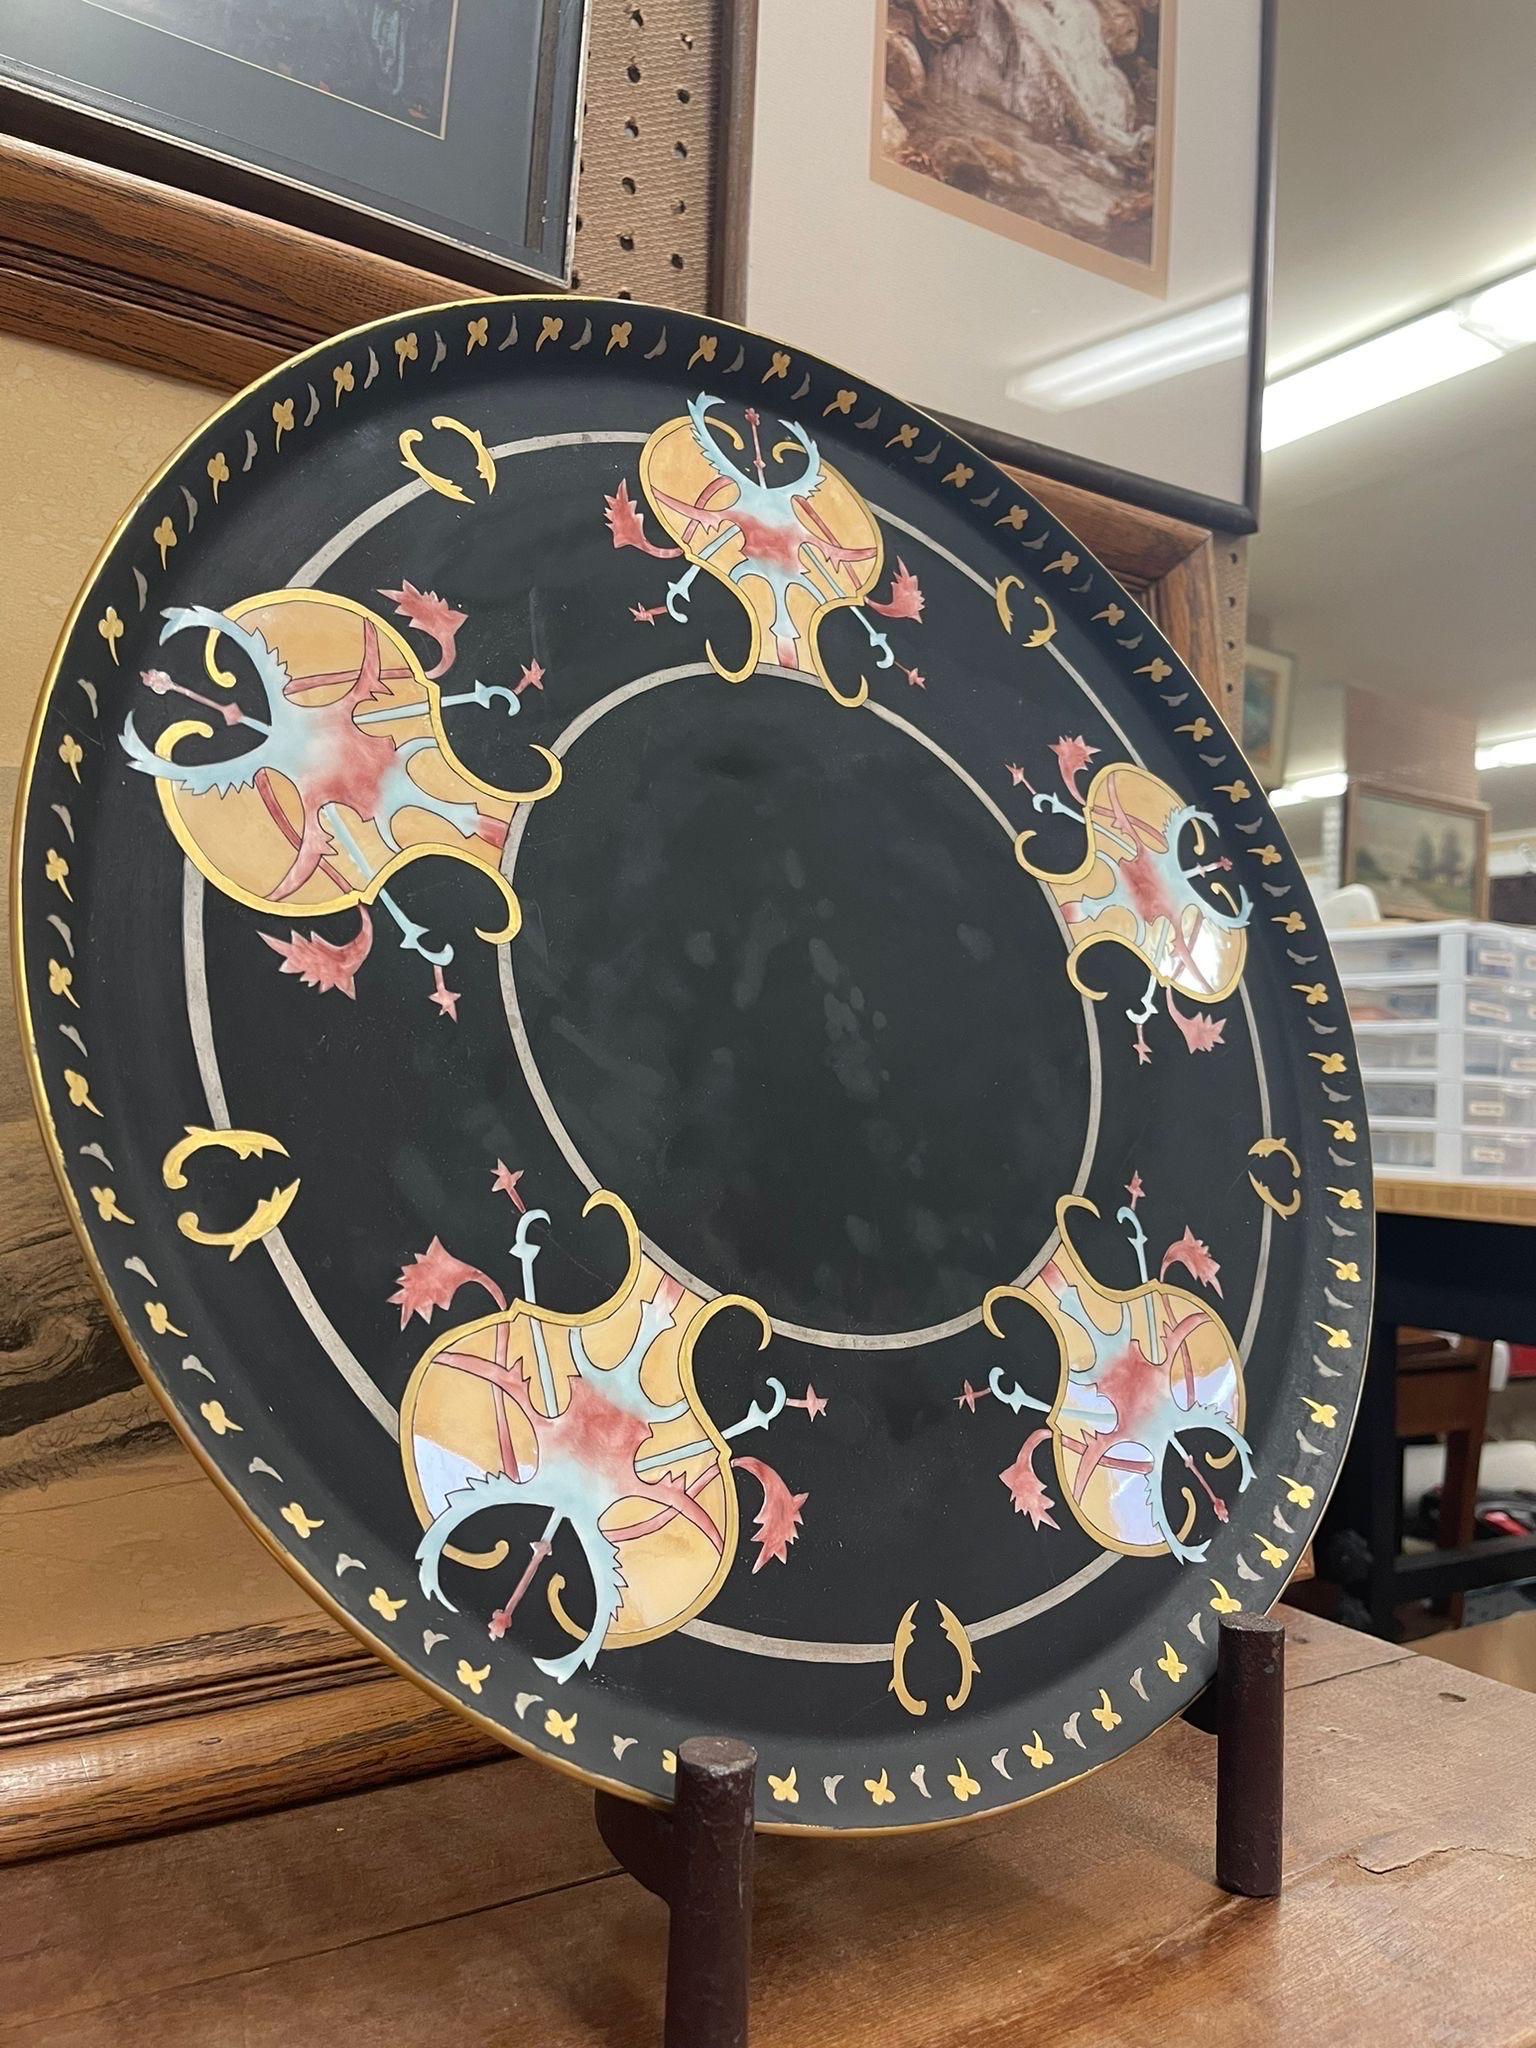 Circa 1900s France. French Makers Mark on Back as Pictured. Vintage Condition Consistent with Age. Art Nouveau Motif. Stand not Included.

Dimensions. 18 Diameter; 1 D